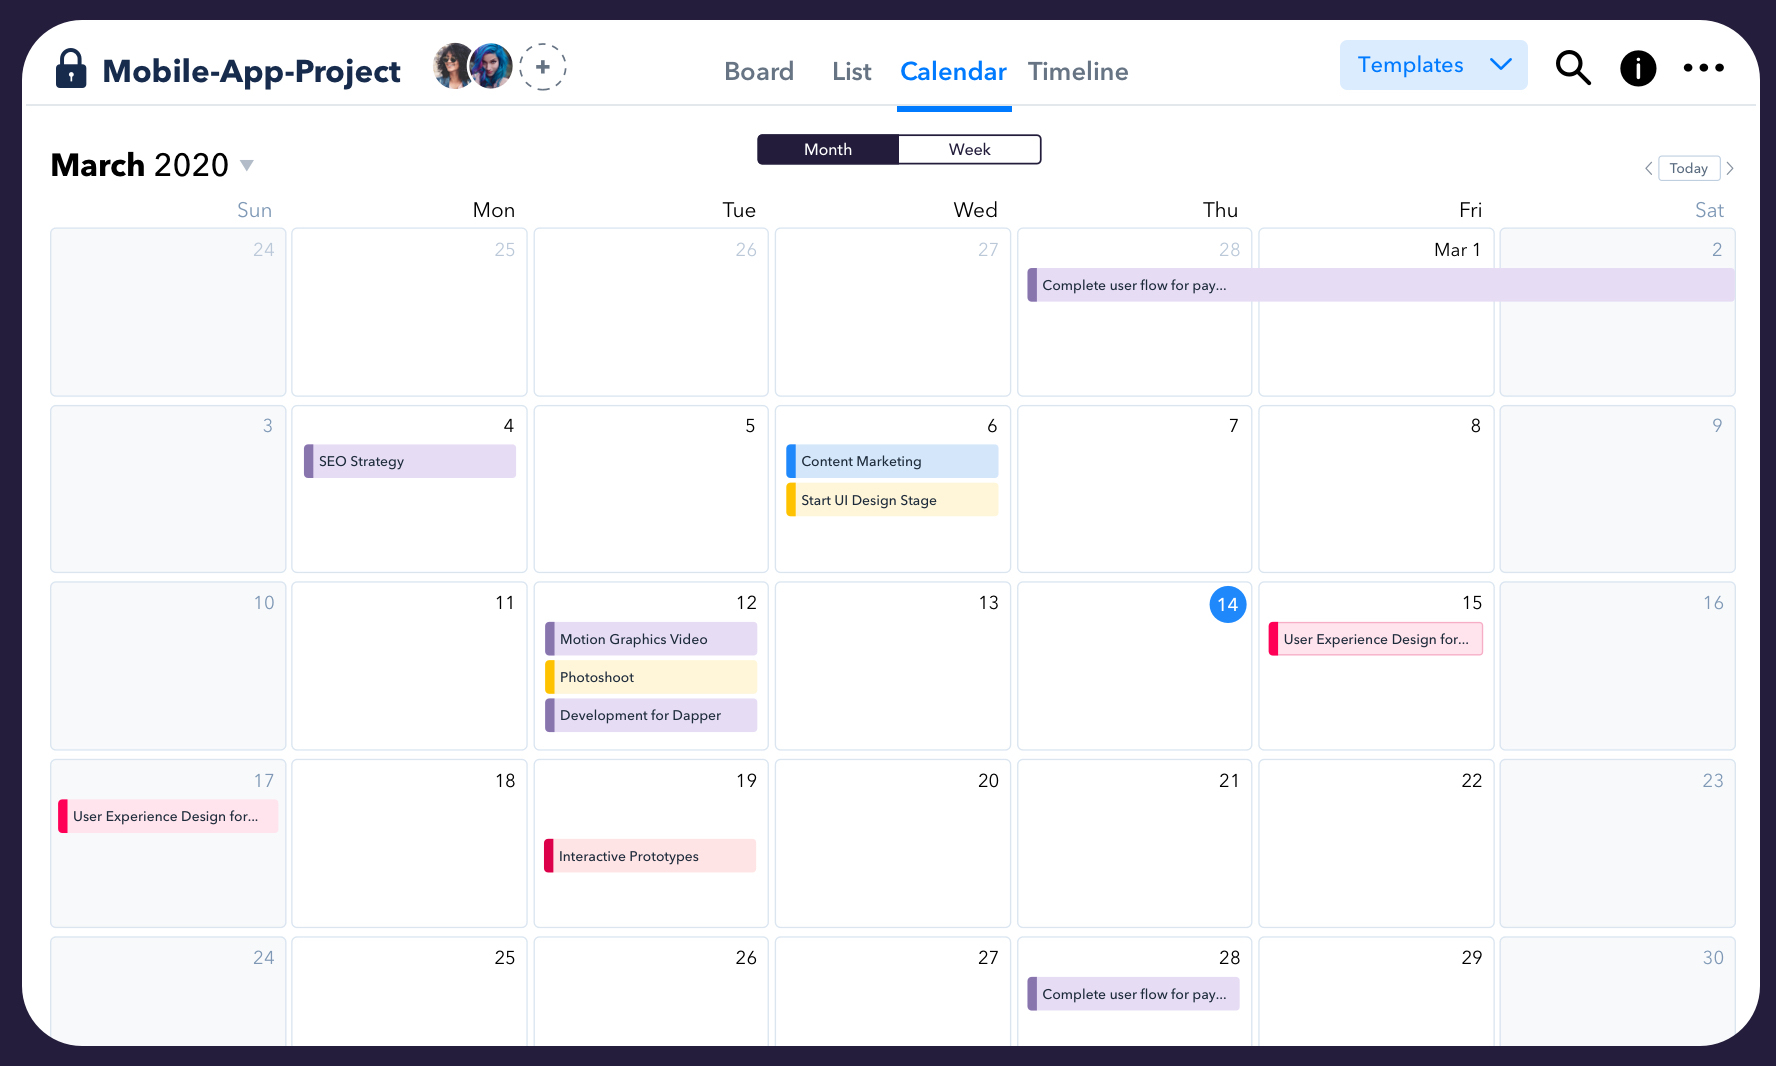 Stay organized and on schedule with HeyCollab's Calendar View. See tasks, deadlines, and team availability at a glance for efficient planning.